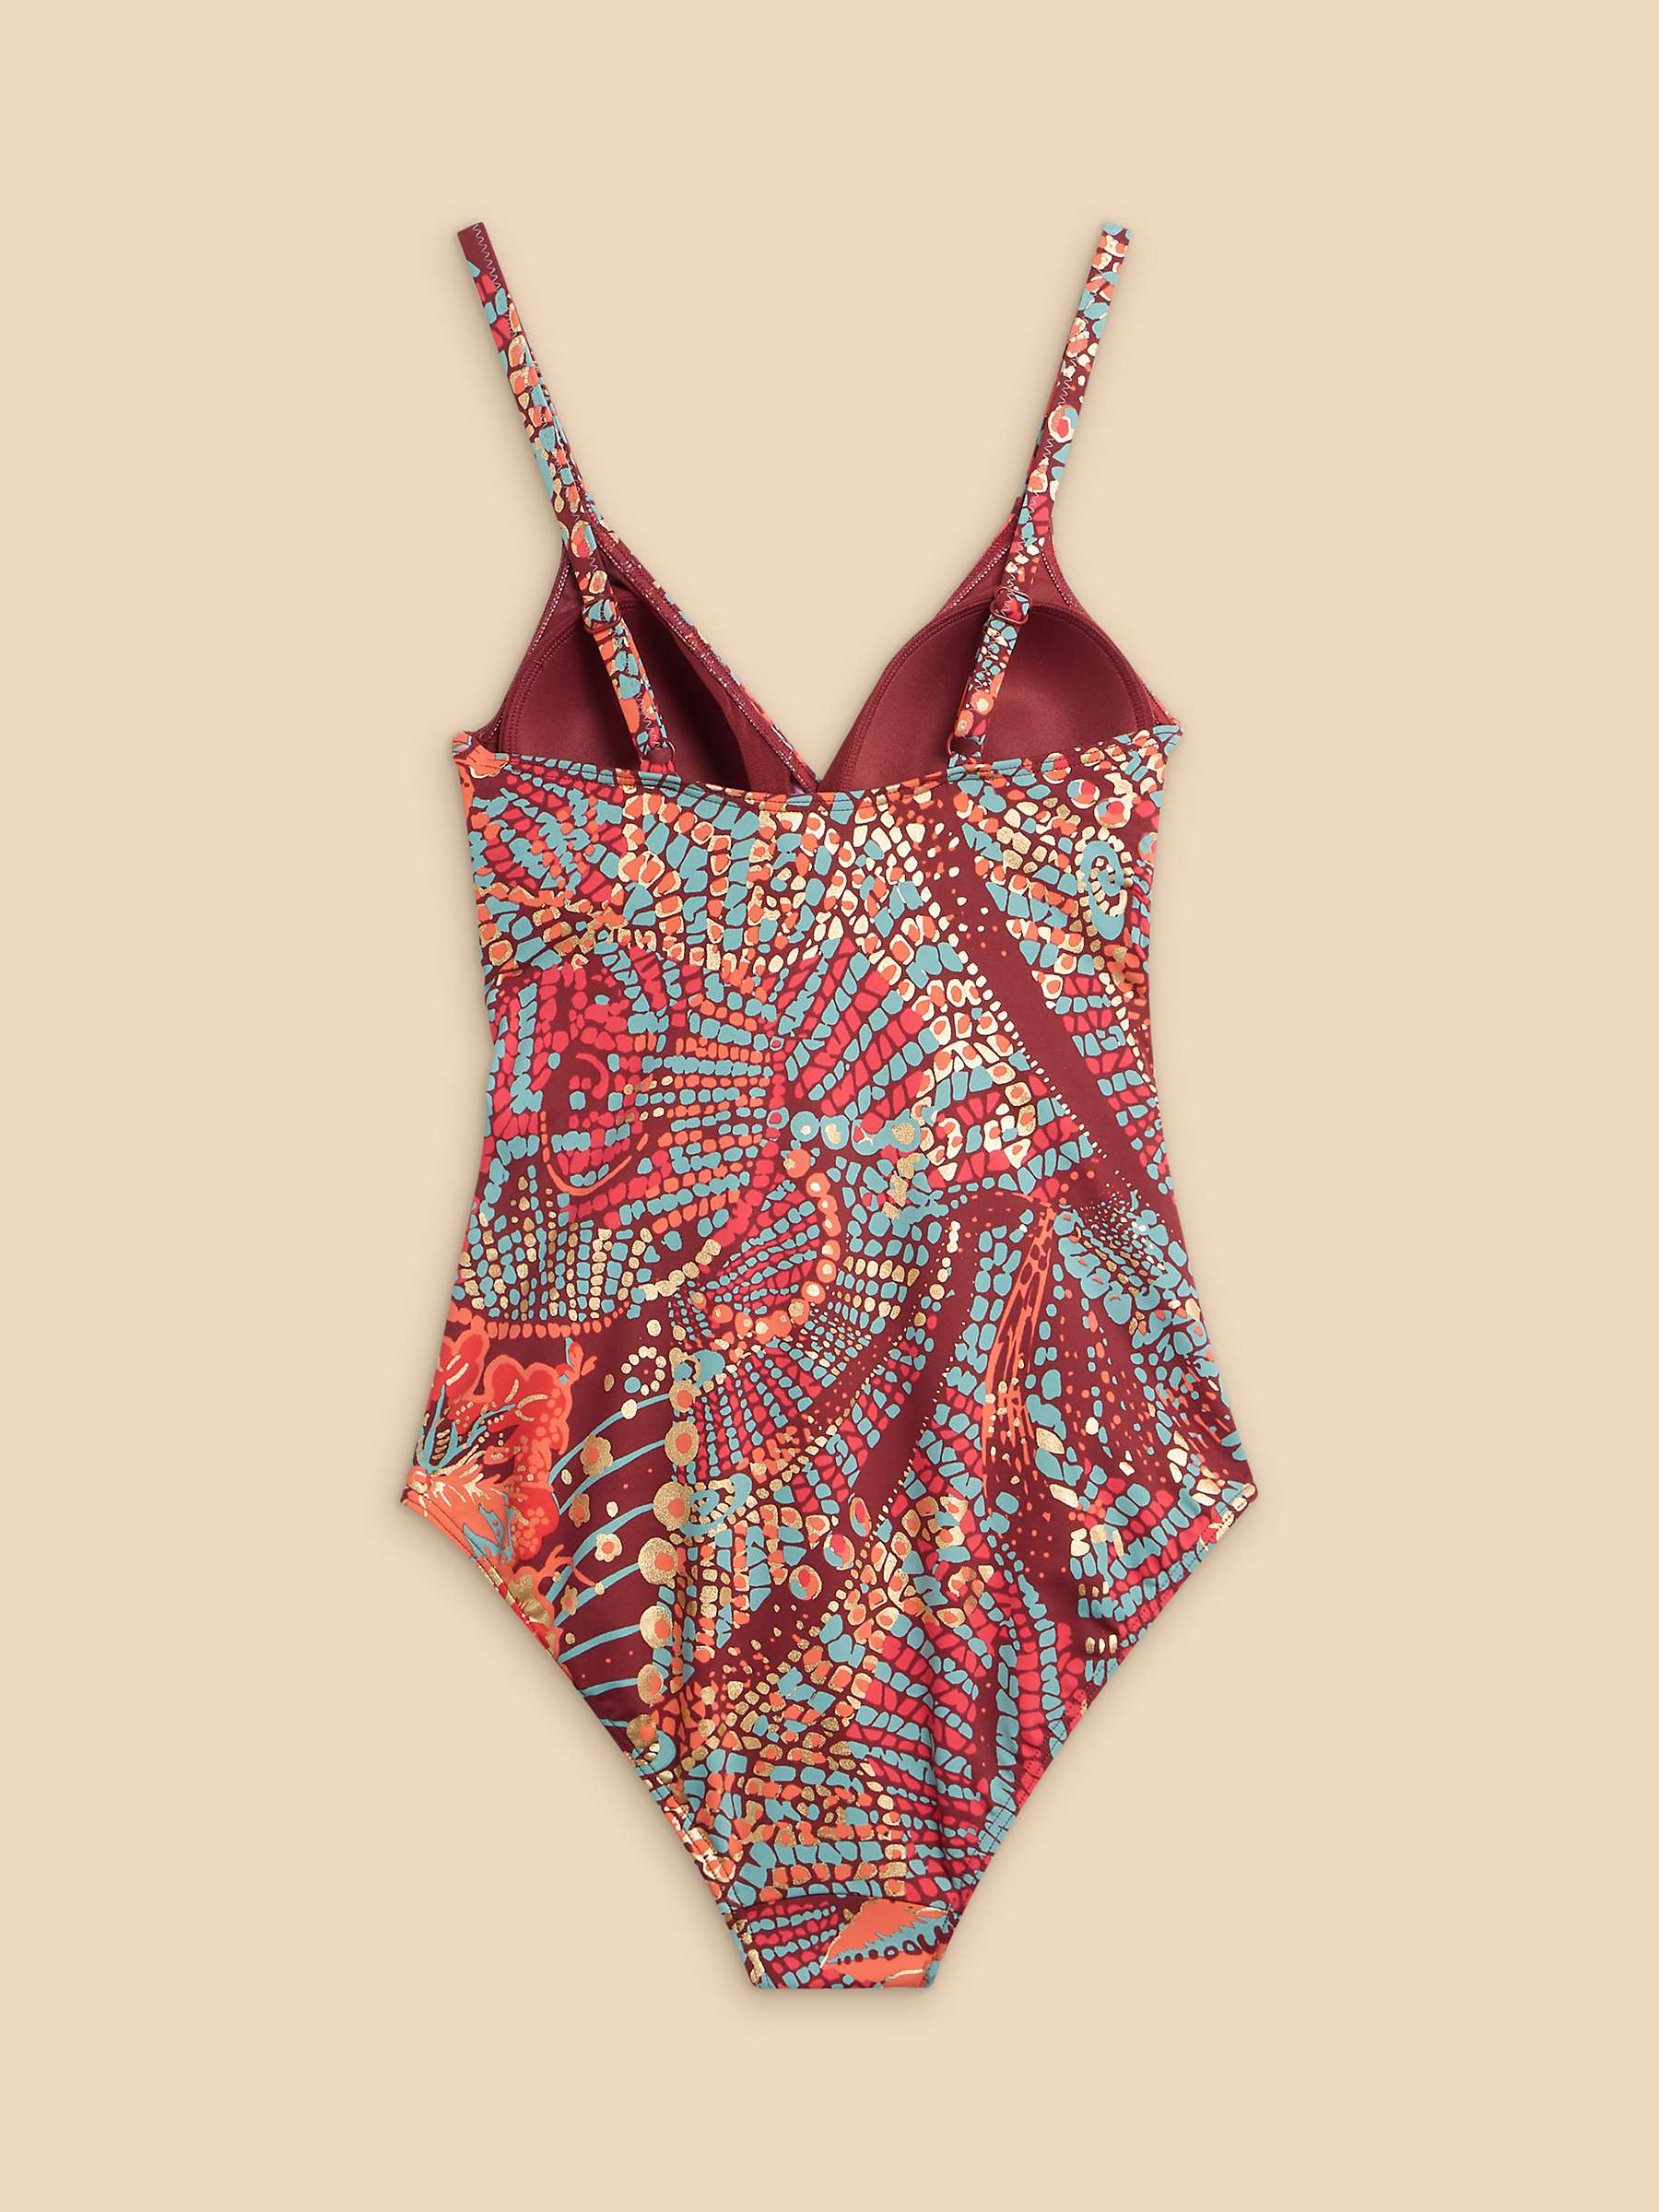 Buy White Stuff Tabitha Control Swimsuit, Red/Multi Online at johnlewis.com